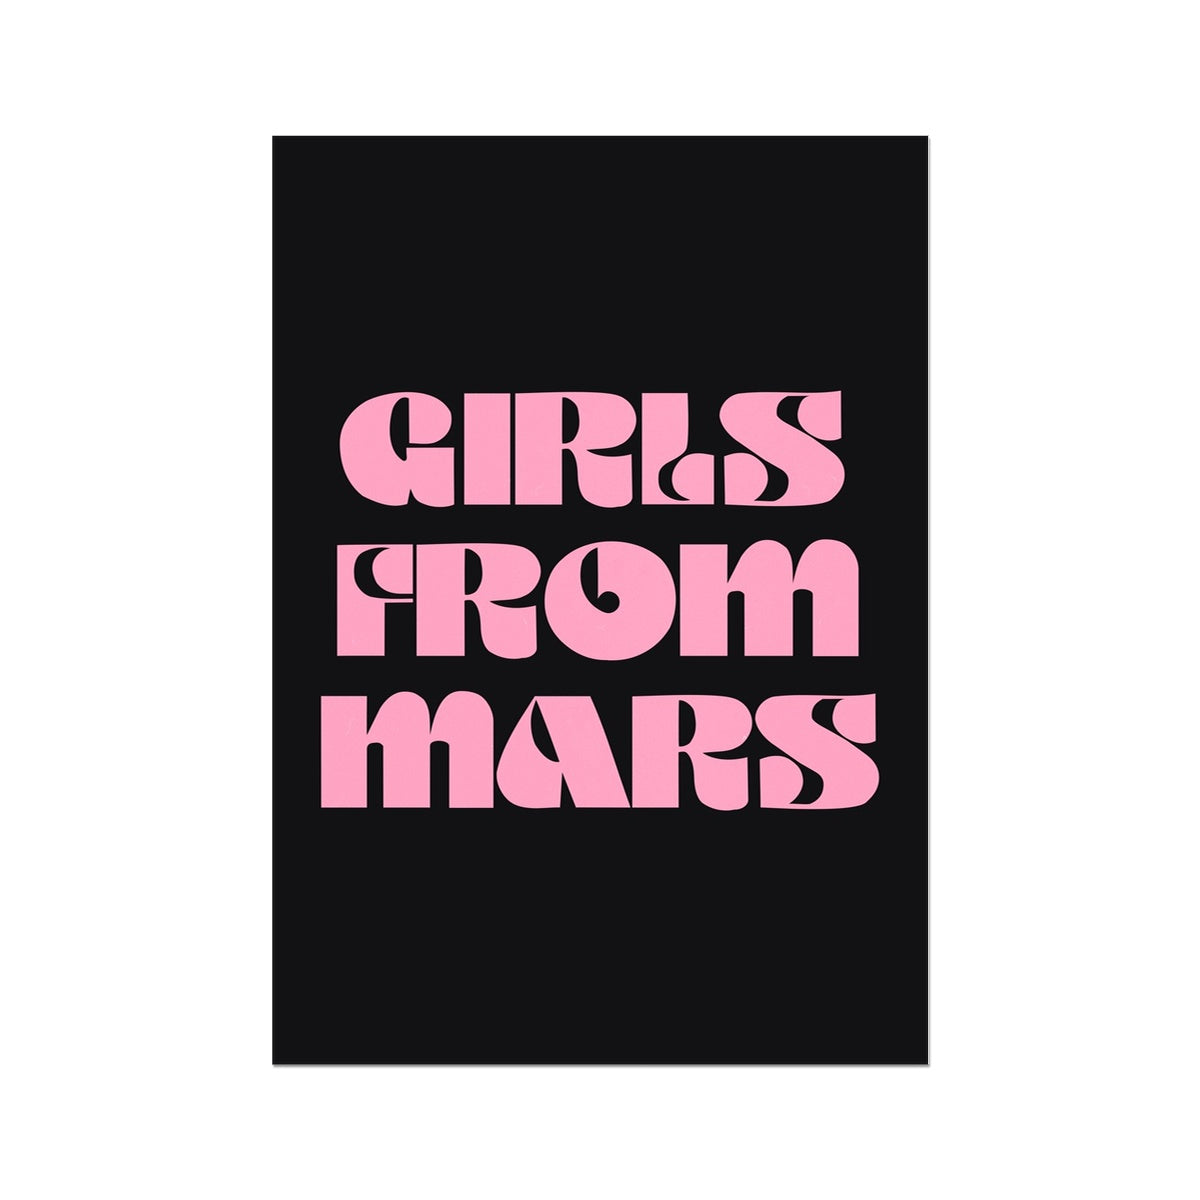 © les muses / Cool vintage typography art prints drawing from 90s grunge, girly Y2K and groovy 70s aesthetics. Retro style wall art and funky posters for trendy apartment or dorm decor with a killer aesthetic.